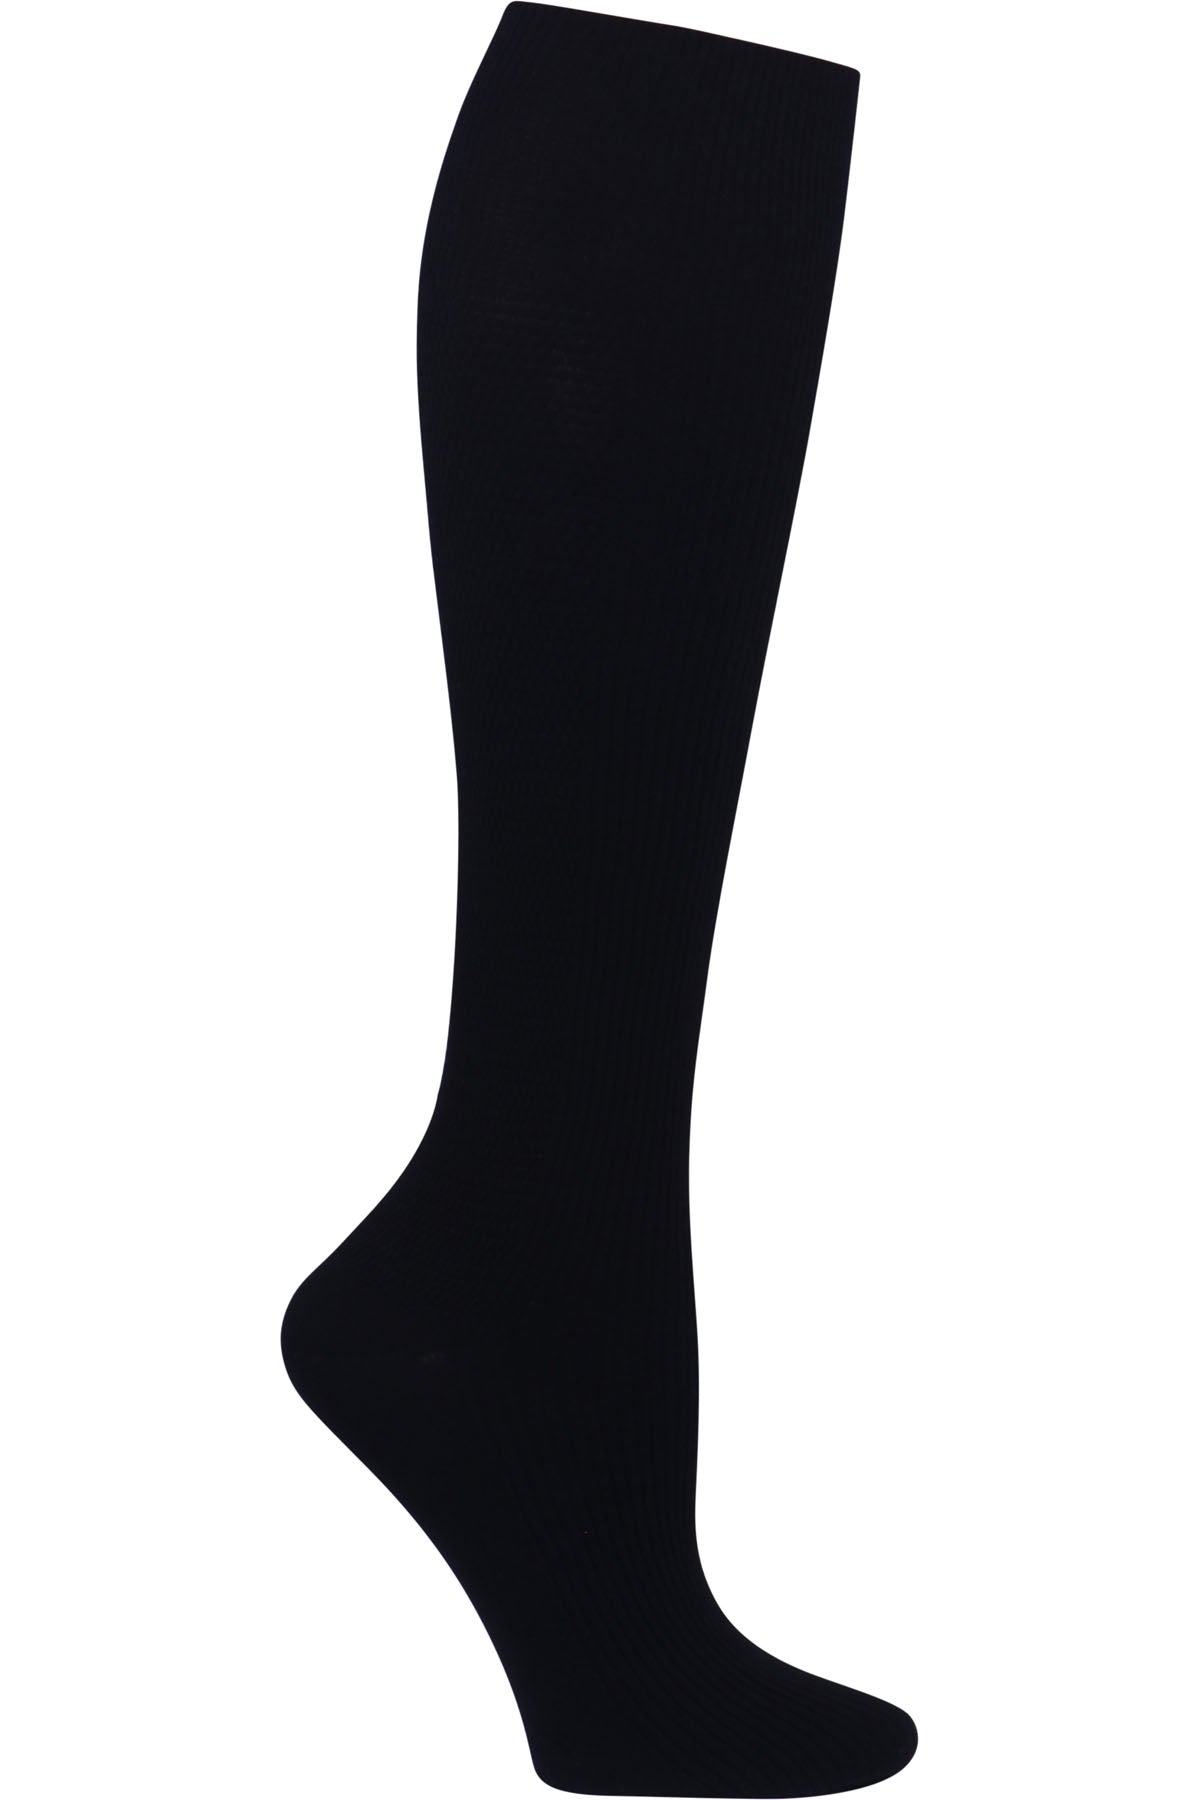 Cherokee Mens Support Socks 8-12 mmHg in Black at Parker's Clothing and Shoes.